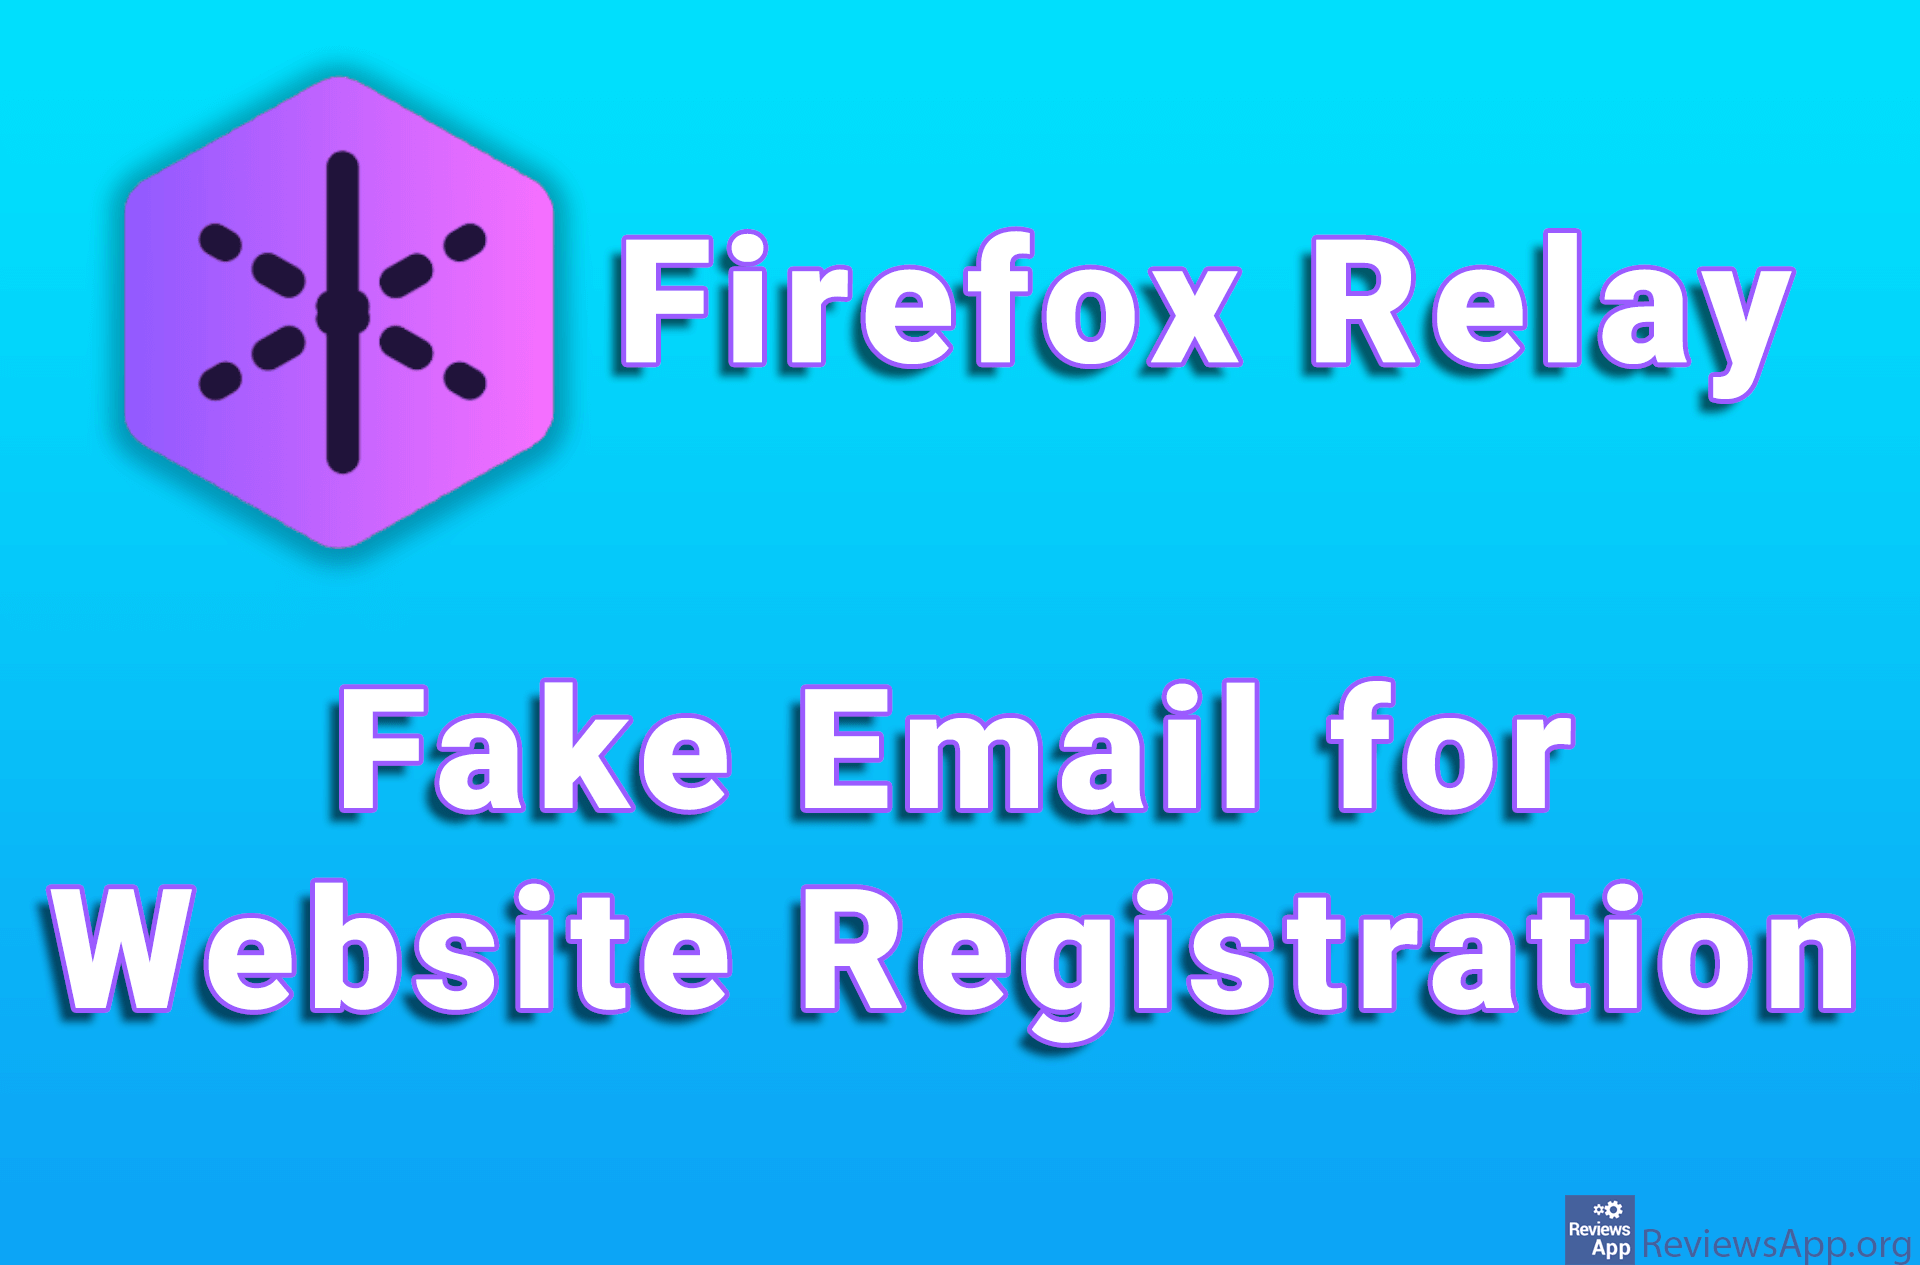 Firefox Relay – Fake Email for Website Registration